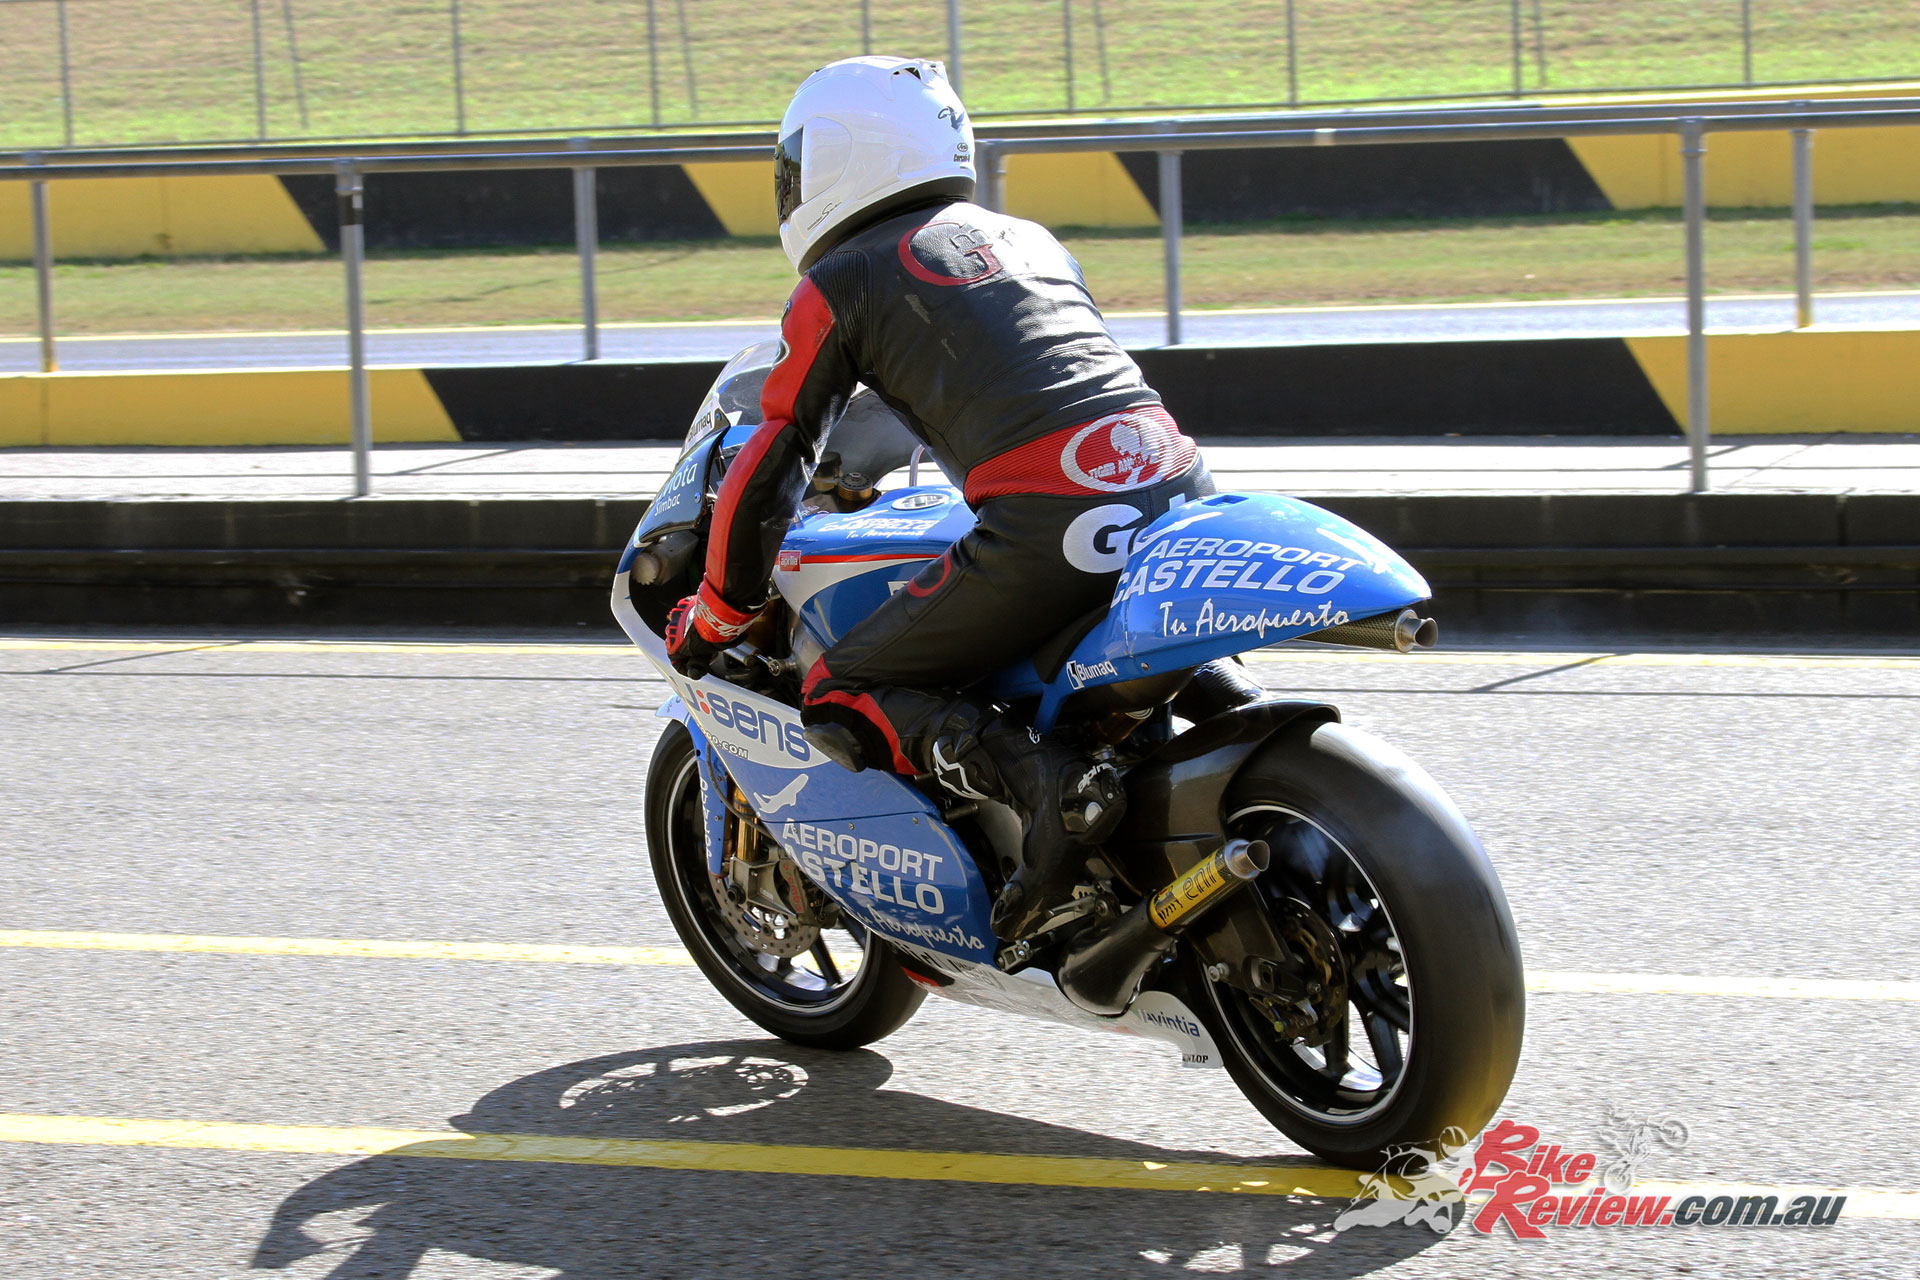 Peter Galvin heading out on track at SMSP on the RSW250.